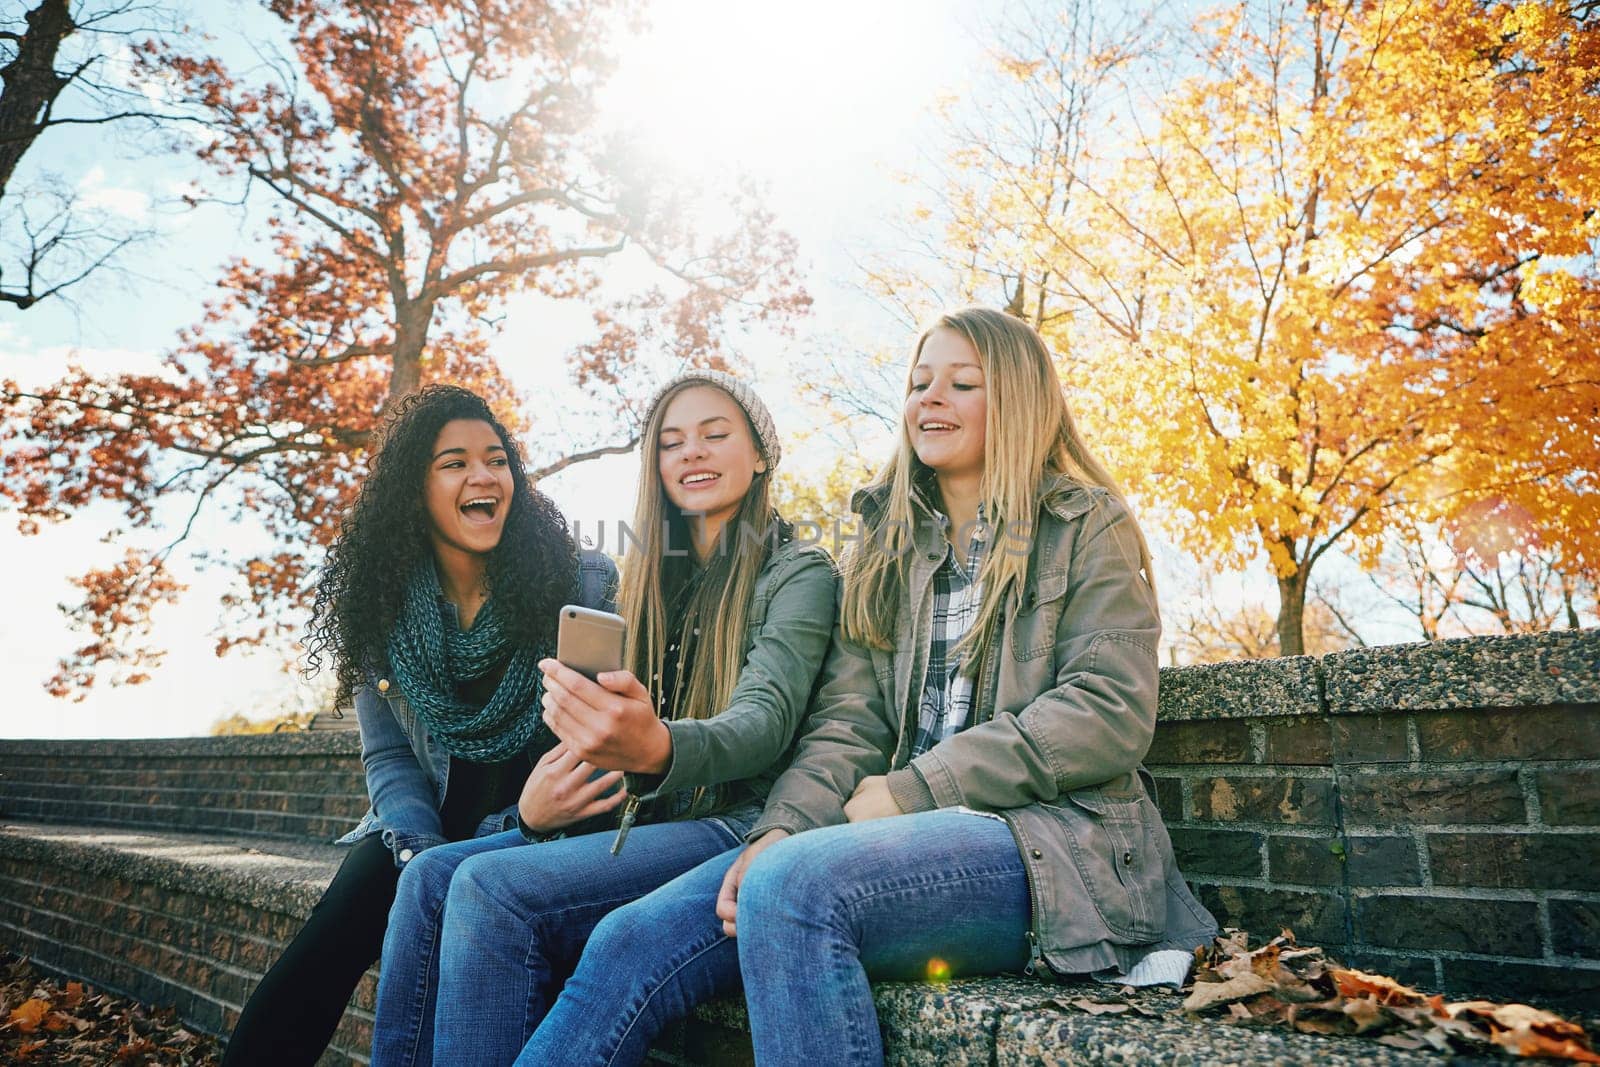 Phone meme, funny or friends in park with smile together for holiday vacation outdoors on social media. Happy people, gossip or gen z girls in nature talking, speaking or laughing at a comedy joke by YuriArcurs